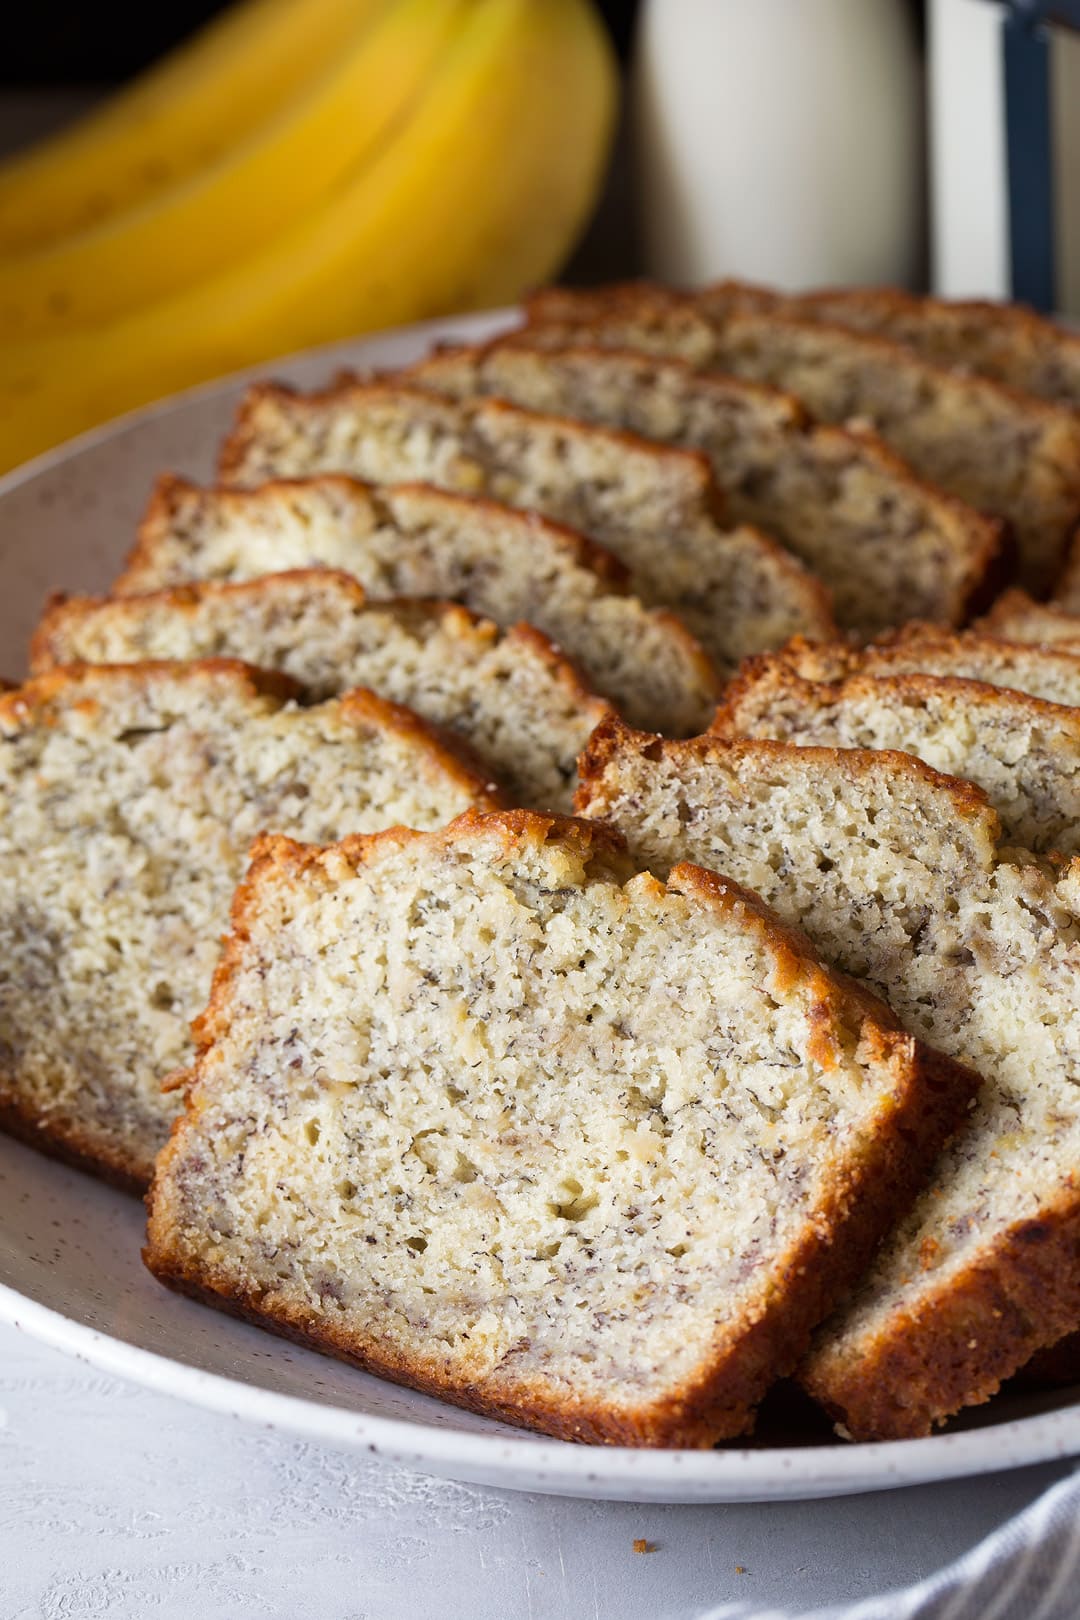 homemade banana bread cut into slices on a large plate